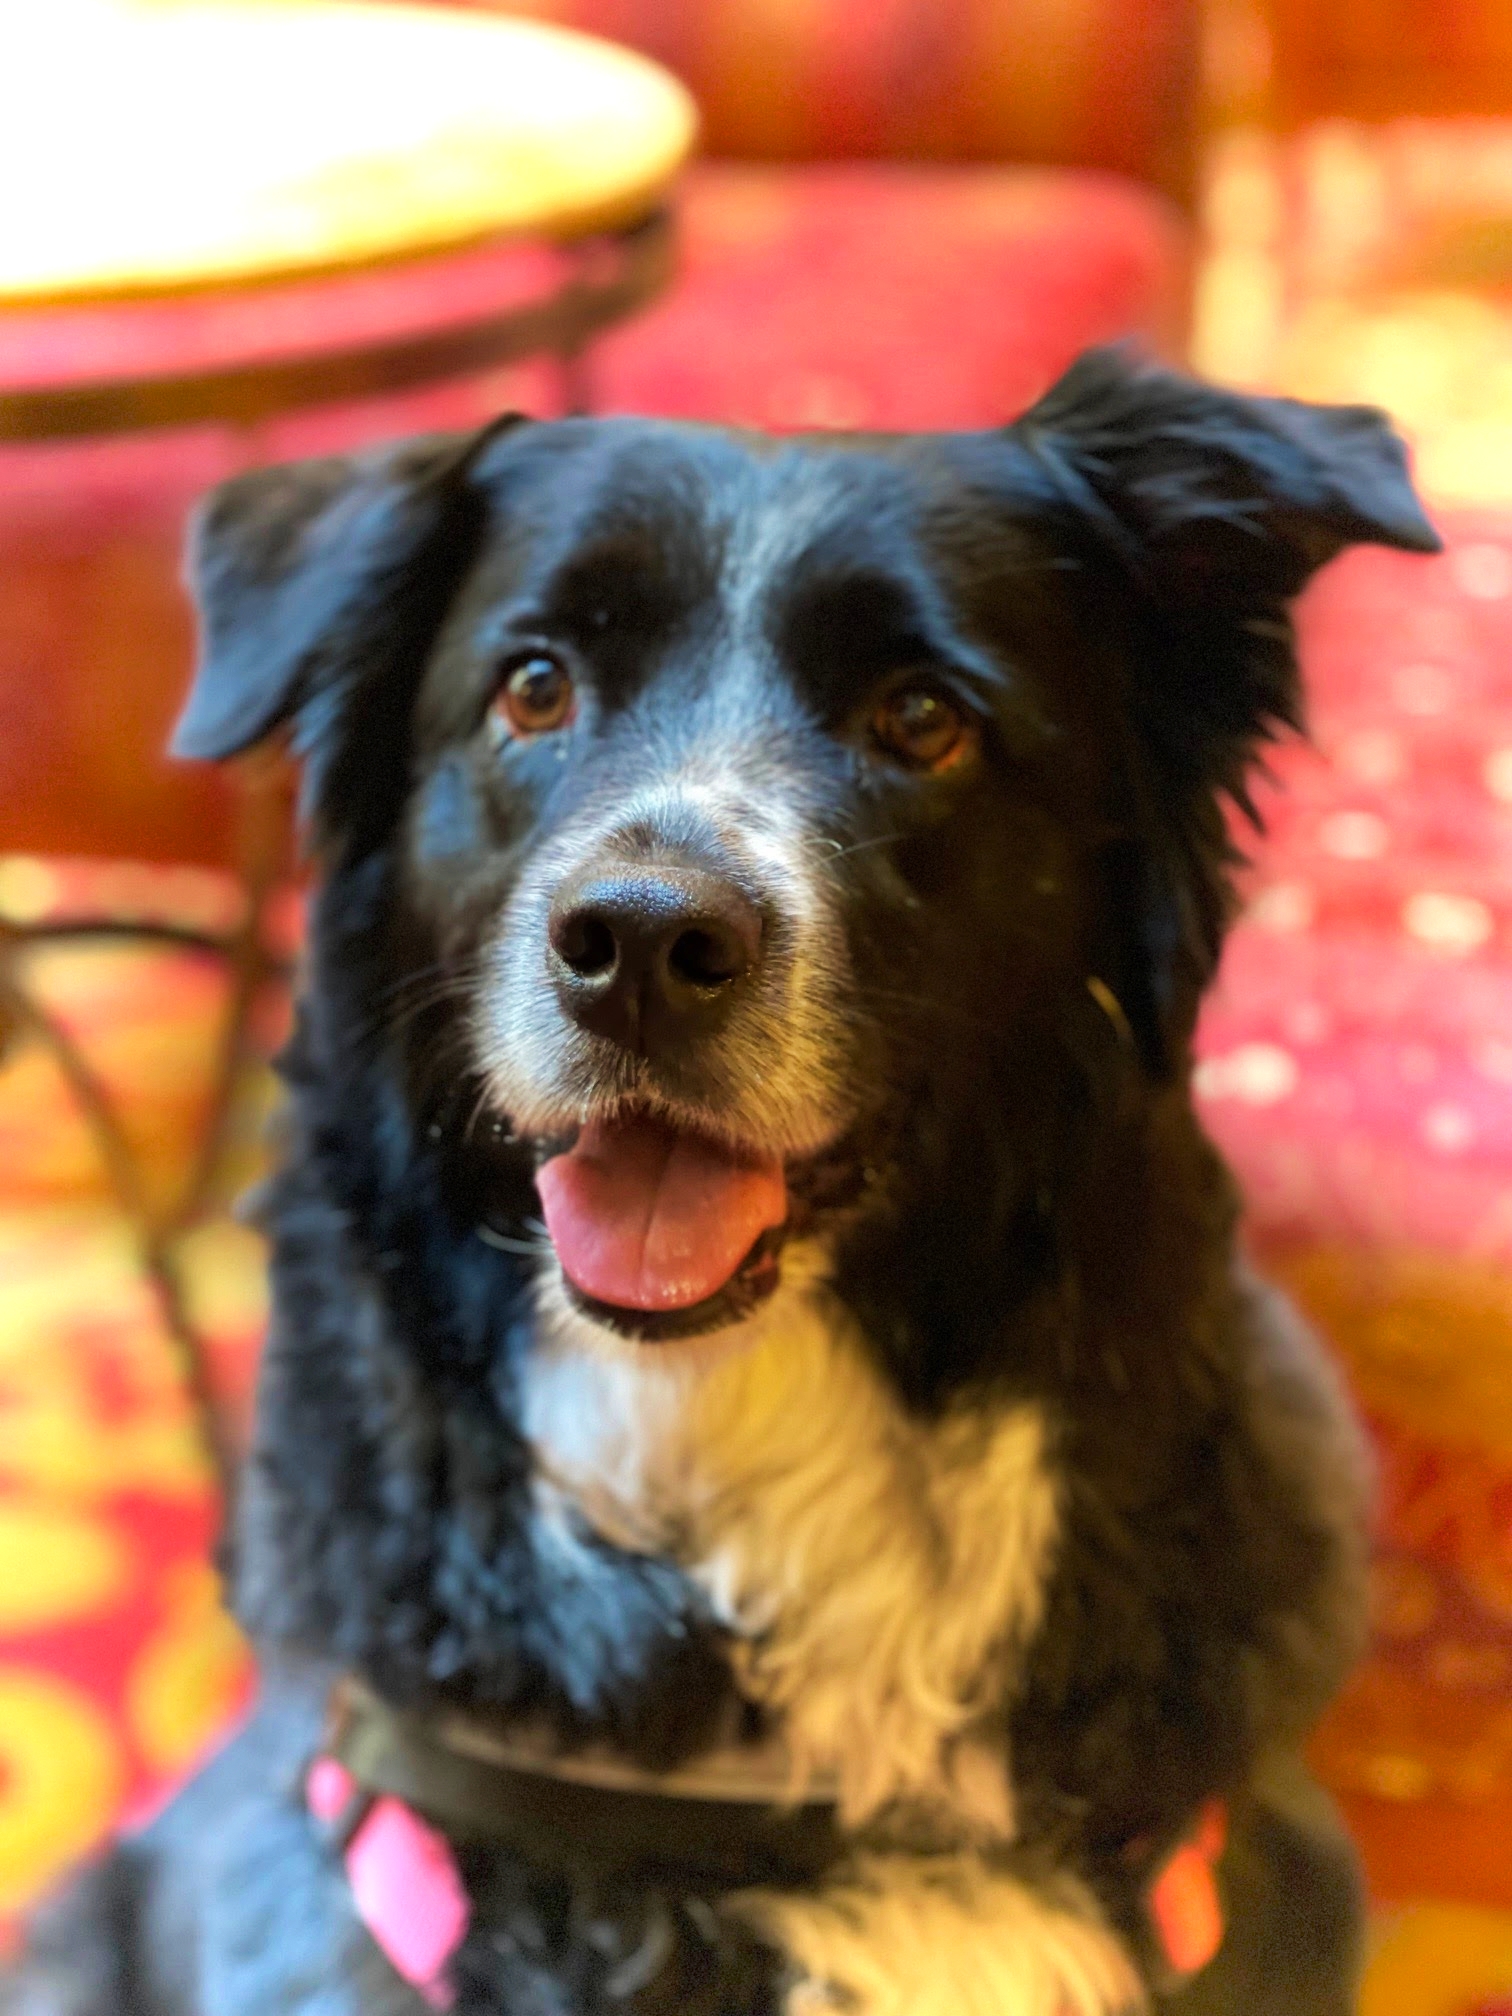 Black herding dog mix sits and smiles at the camera